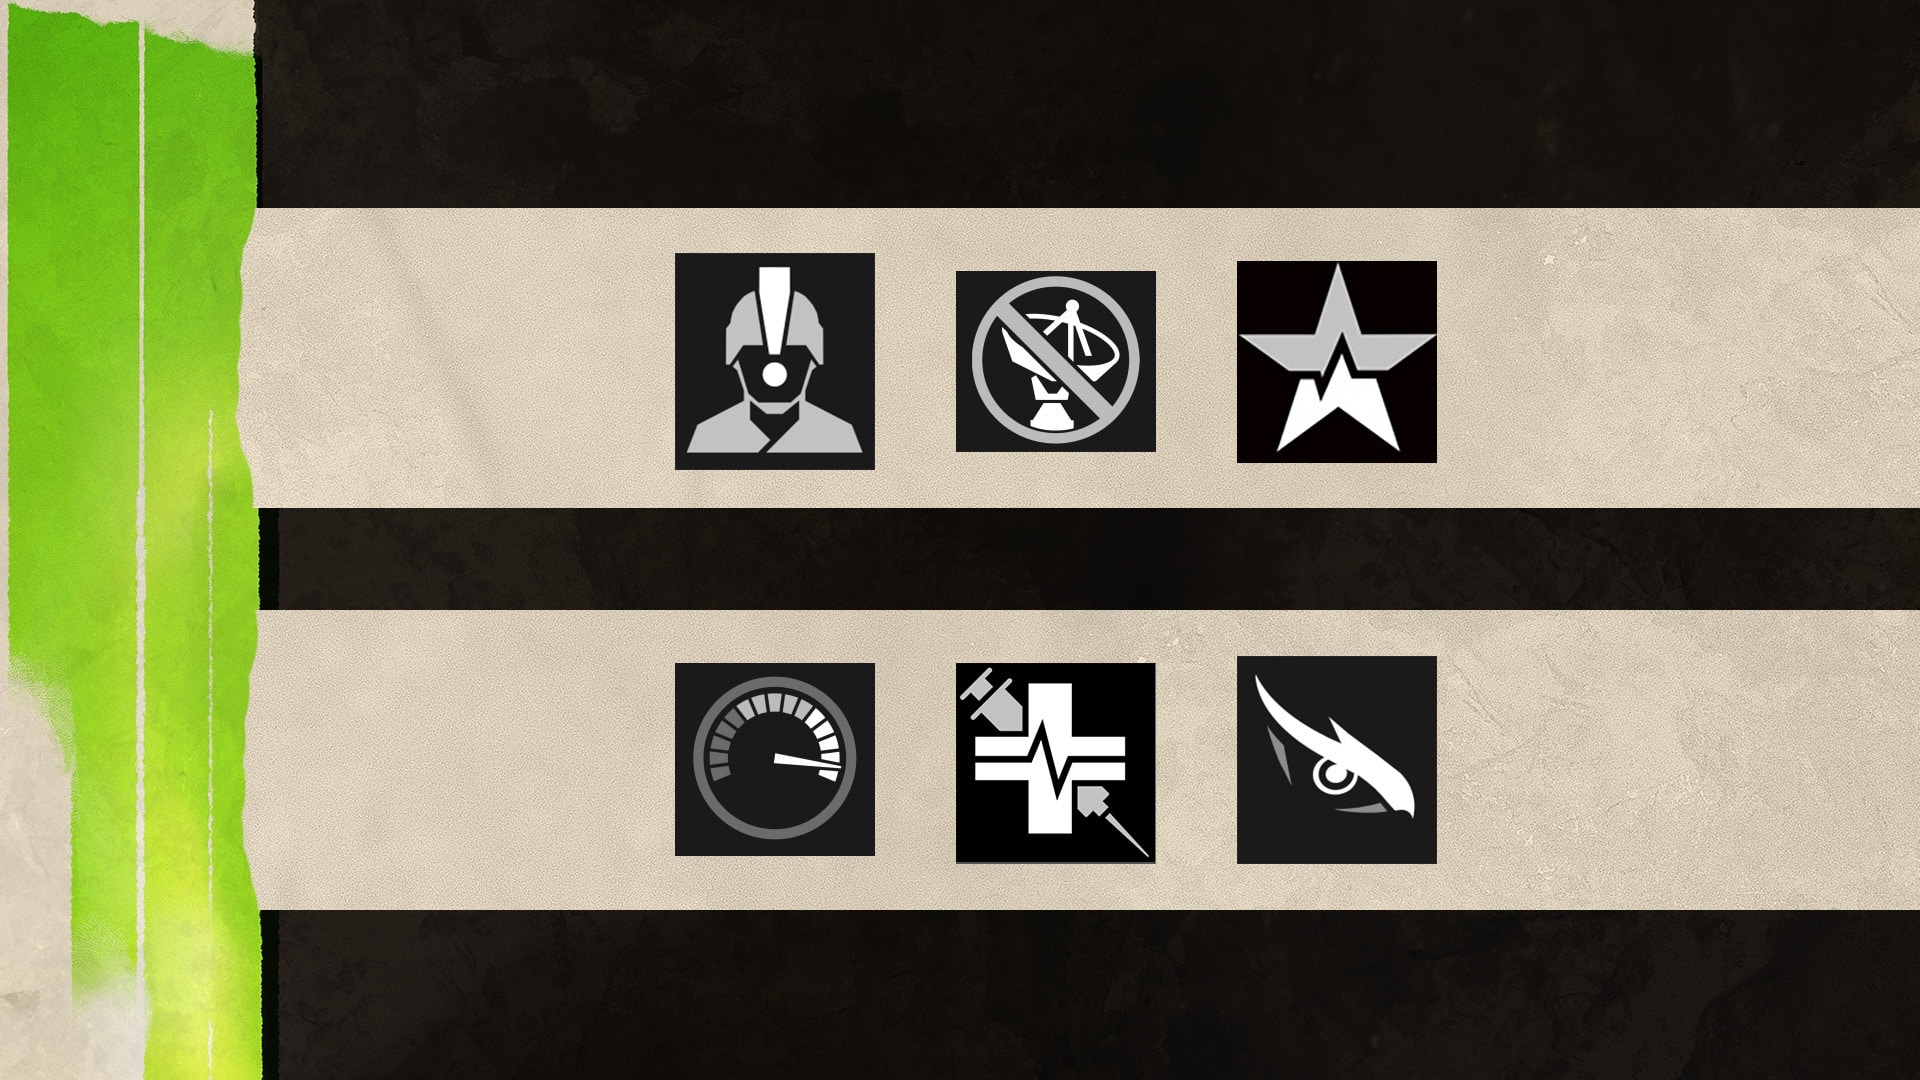 (The Ultimate Perks at a glance (from top left: High Alert, Ghost, Hardline, Overclock, Survivor, Bird''s Eye).)